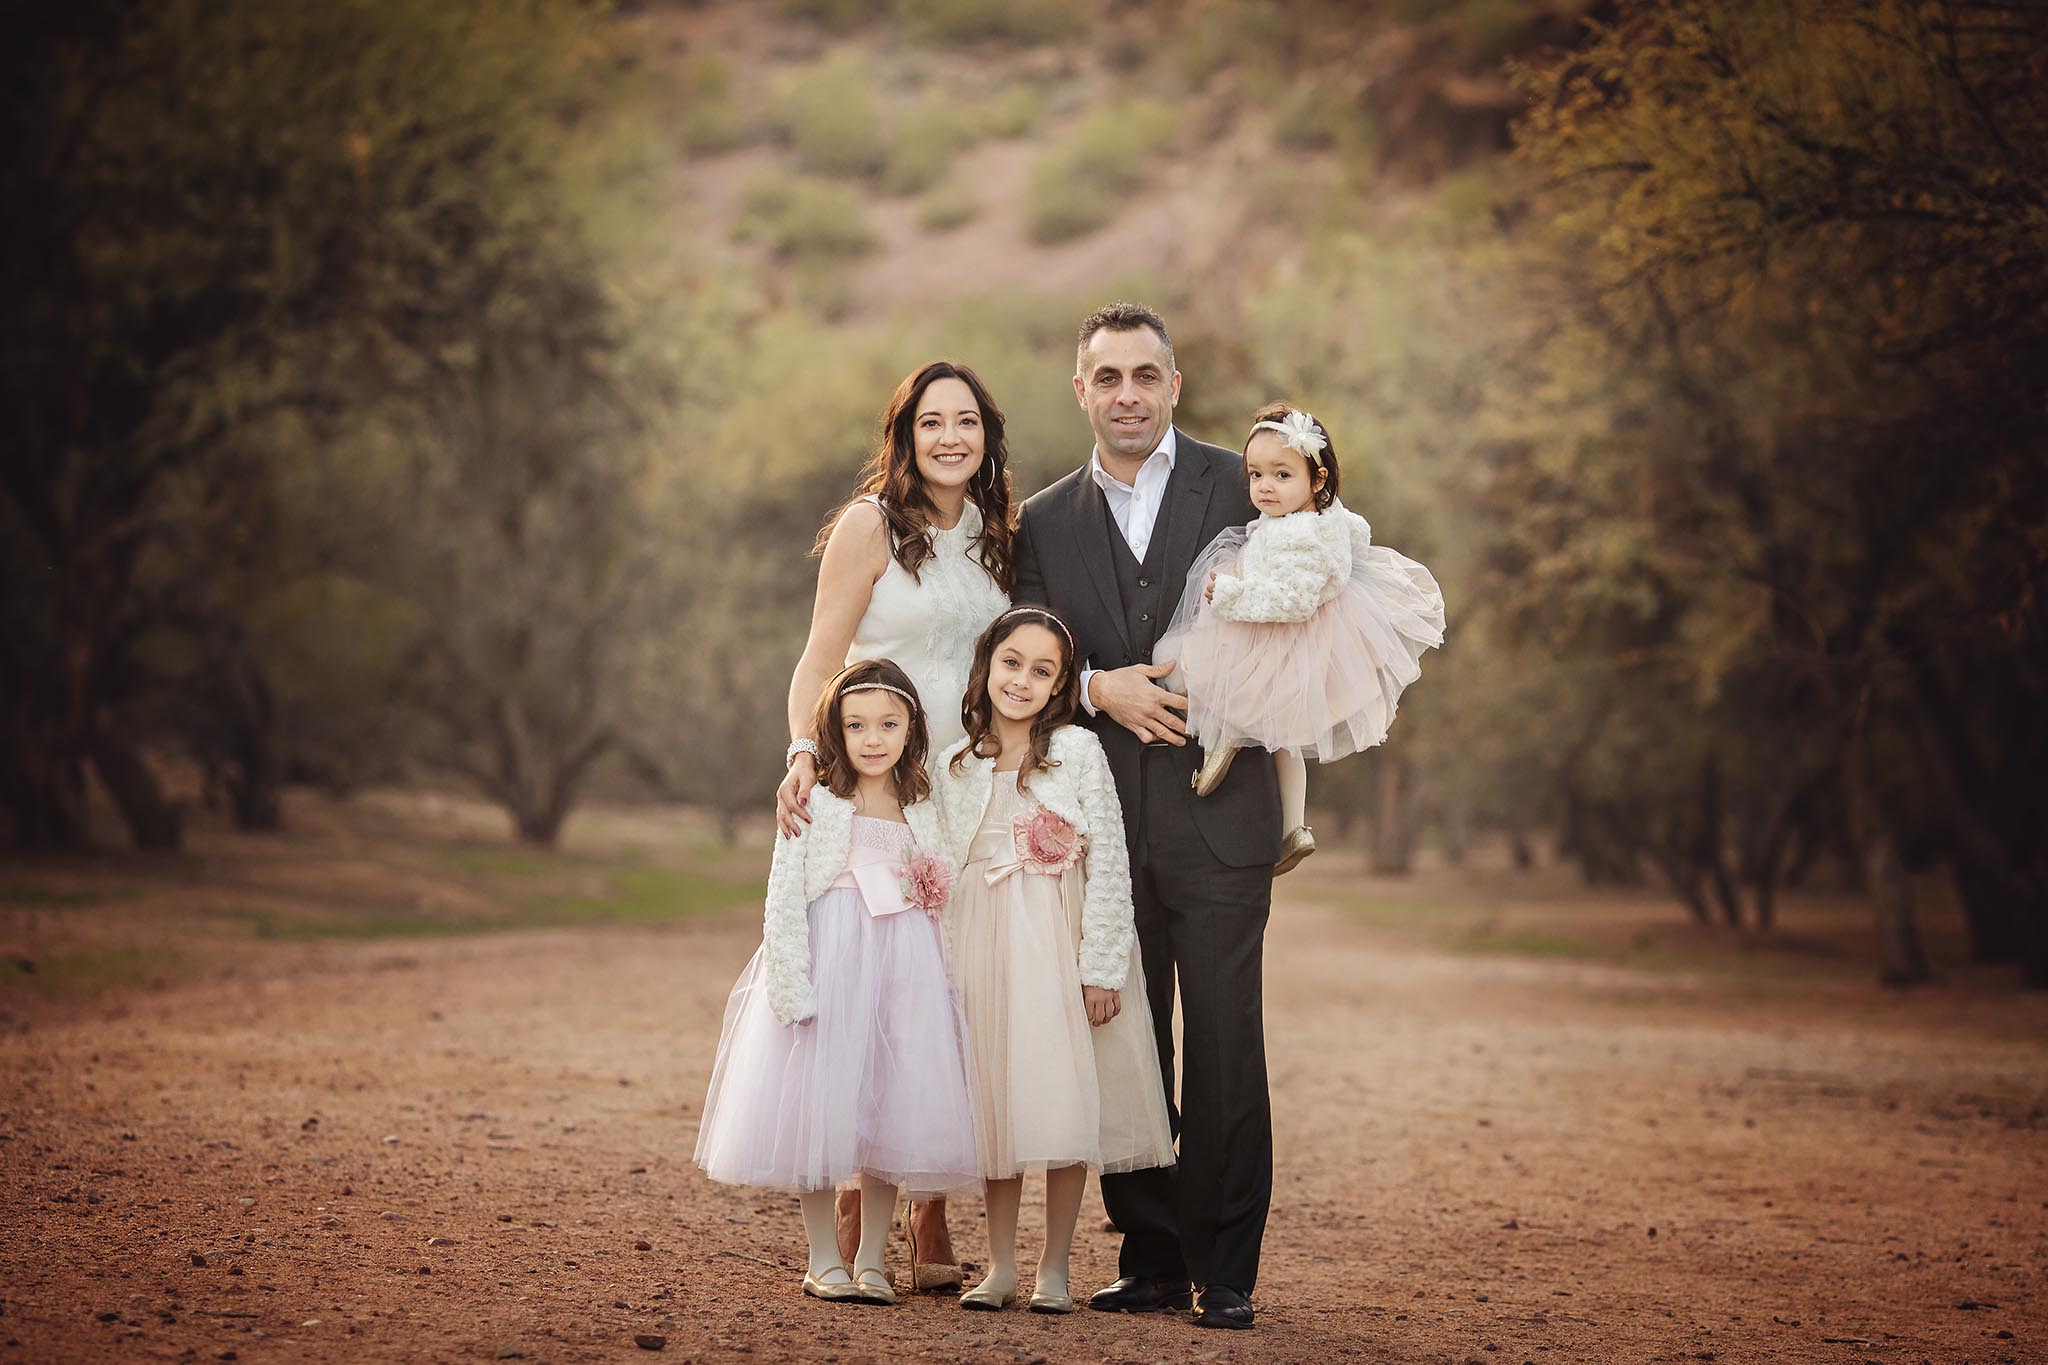 Family of 6 photography at Coon Bluff in Phoenix, AZ